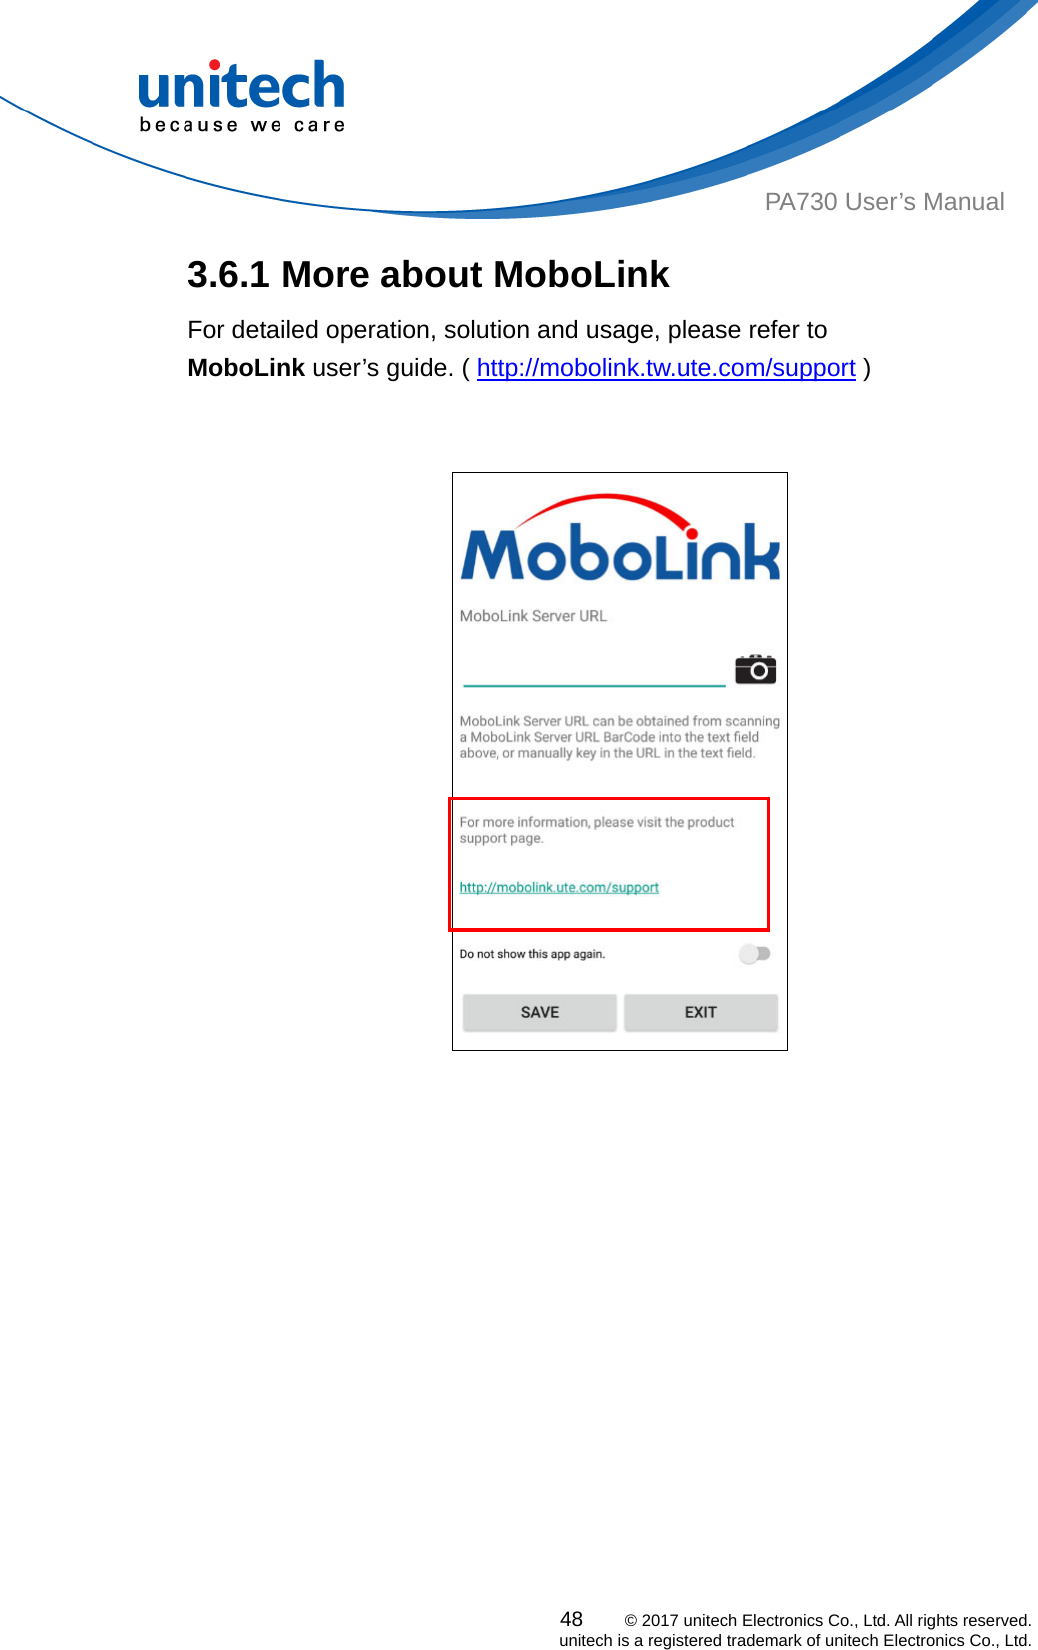  PA730 User’s Manual 3.6.1 More about MoboLink     For detailed operation, solution and usage, please refer to   MoboLink user’s guide. ( http://mobolink.tw.ute.com/support )       48    © 2017 unitech Electronics Co., Ltd. All rights reserved.   unitech is a registered trademark of unitech Electronics Co., Ltd. 